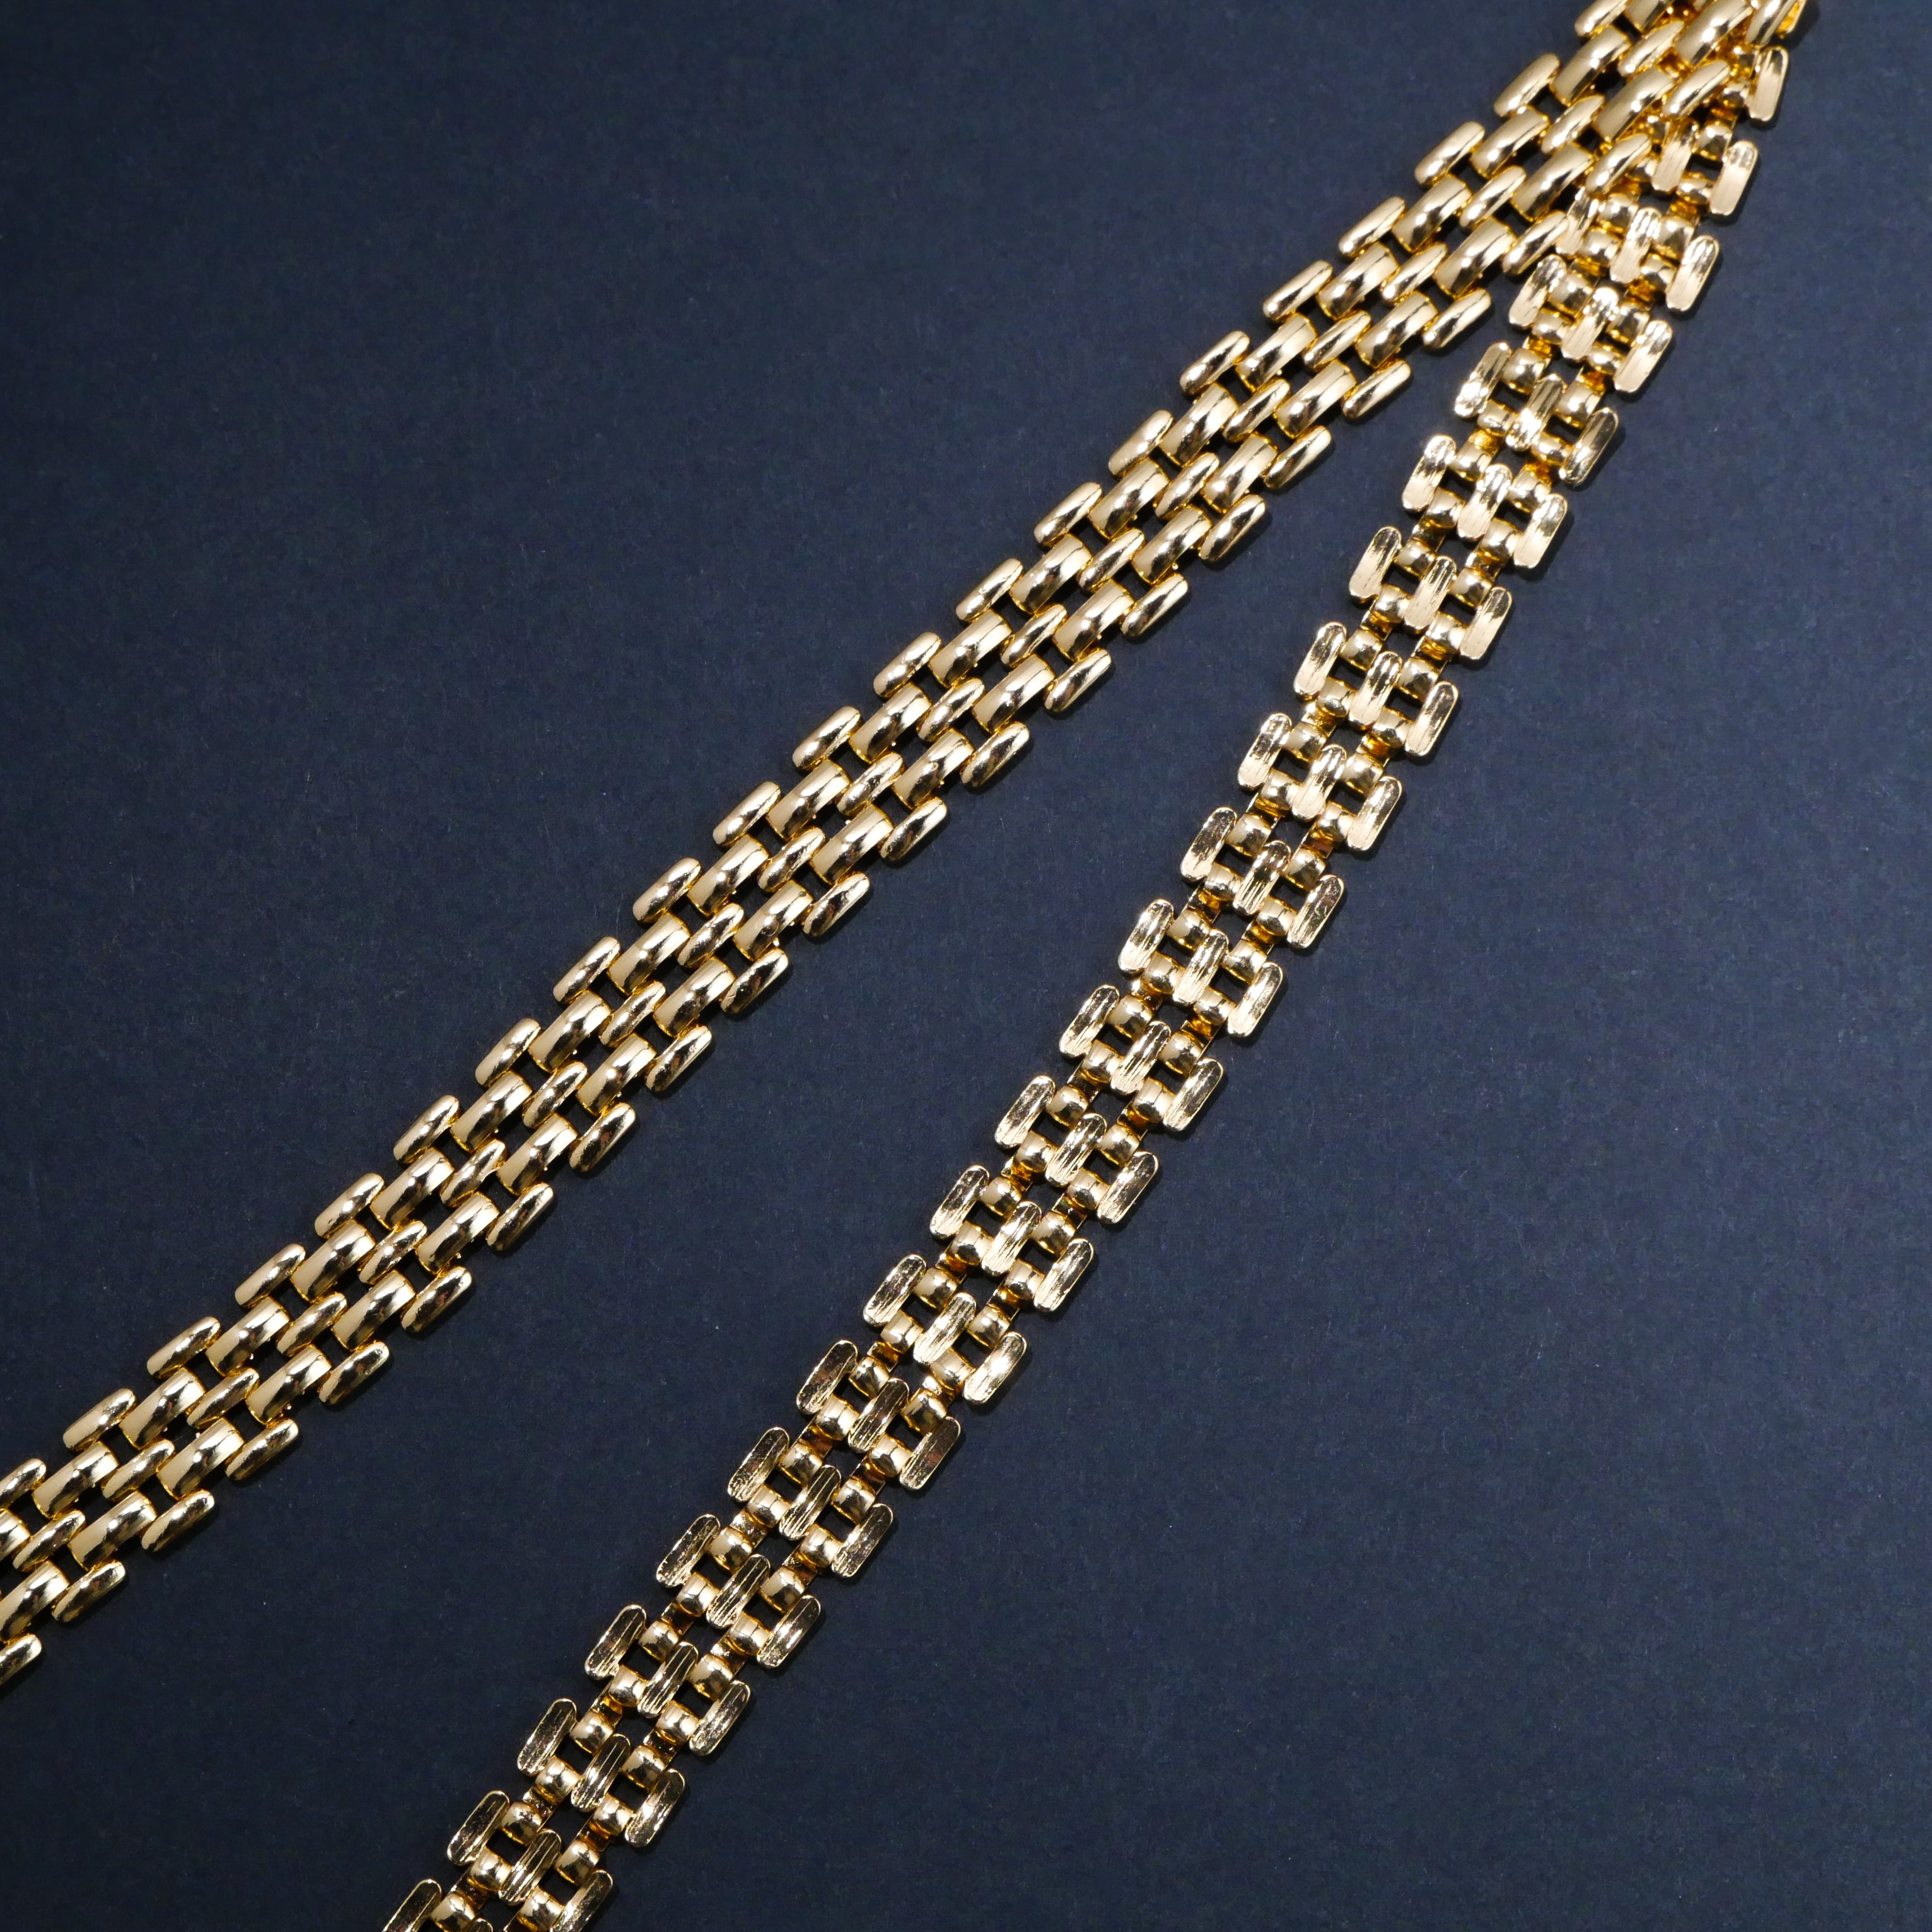 18K Gold Mesh Necklace Ready to Wear Gold Filled Necklace 